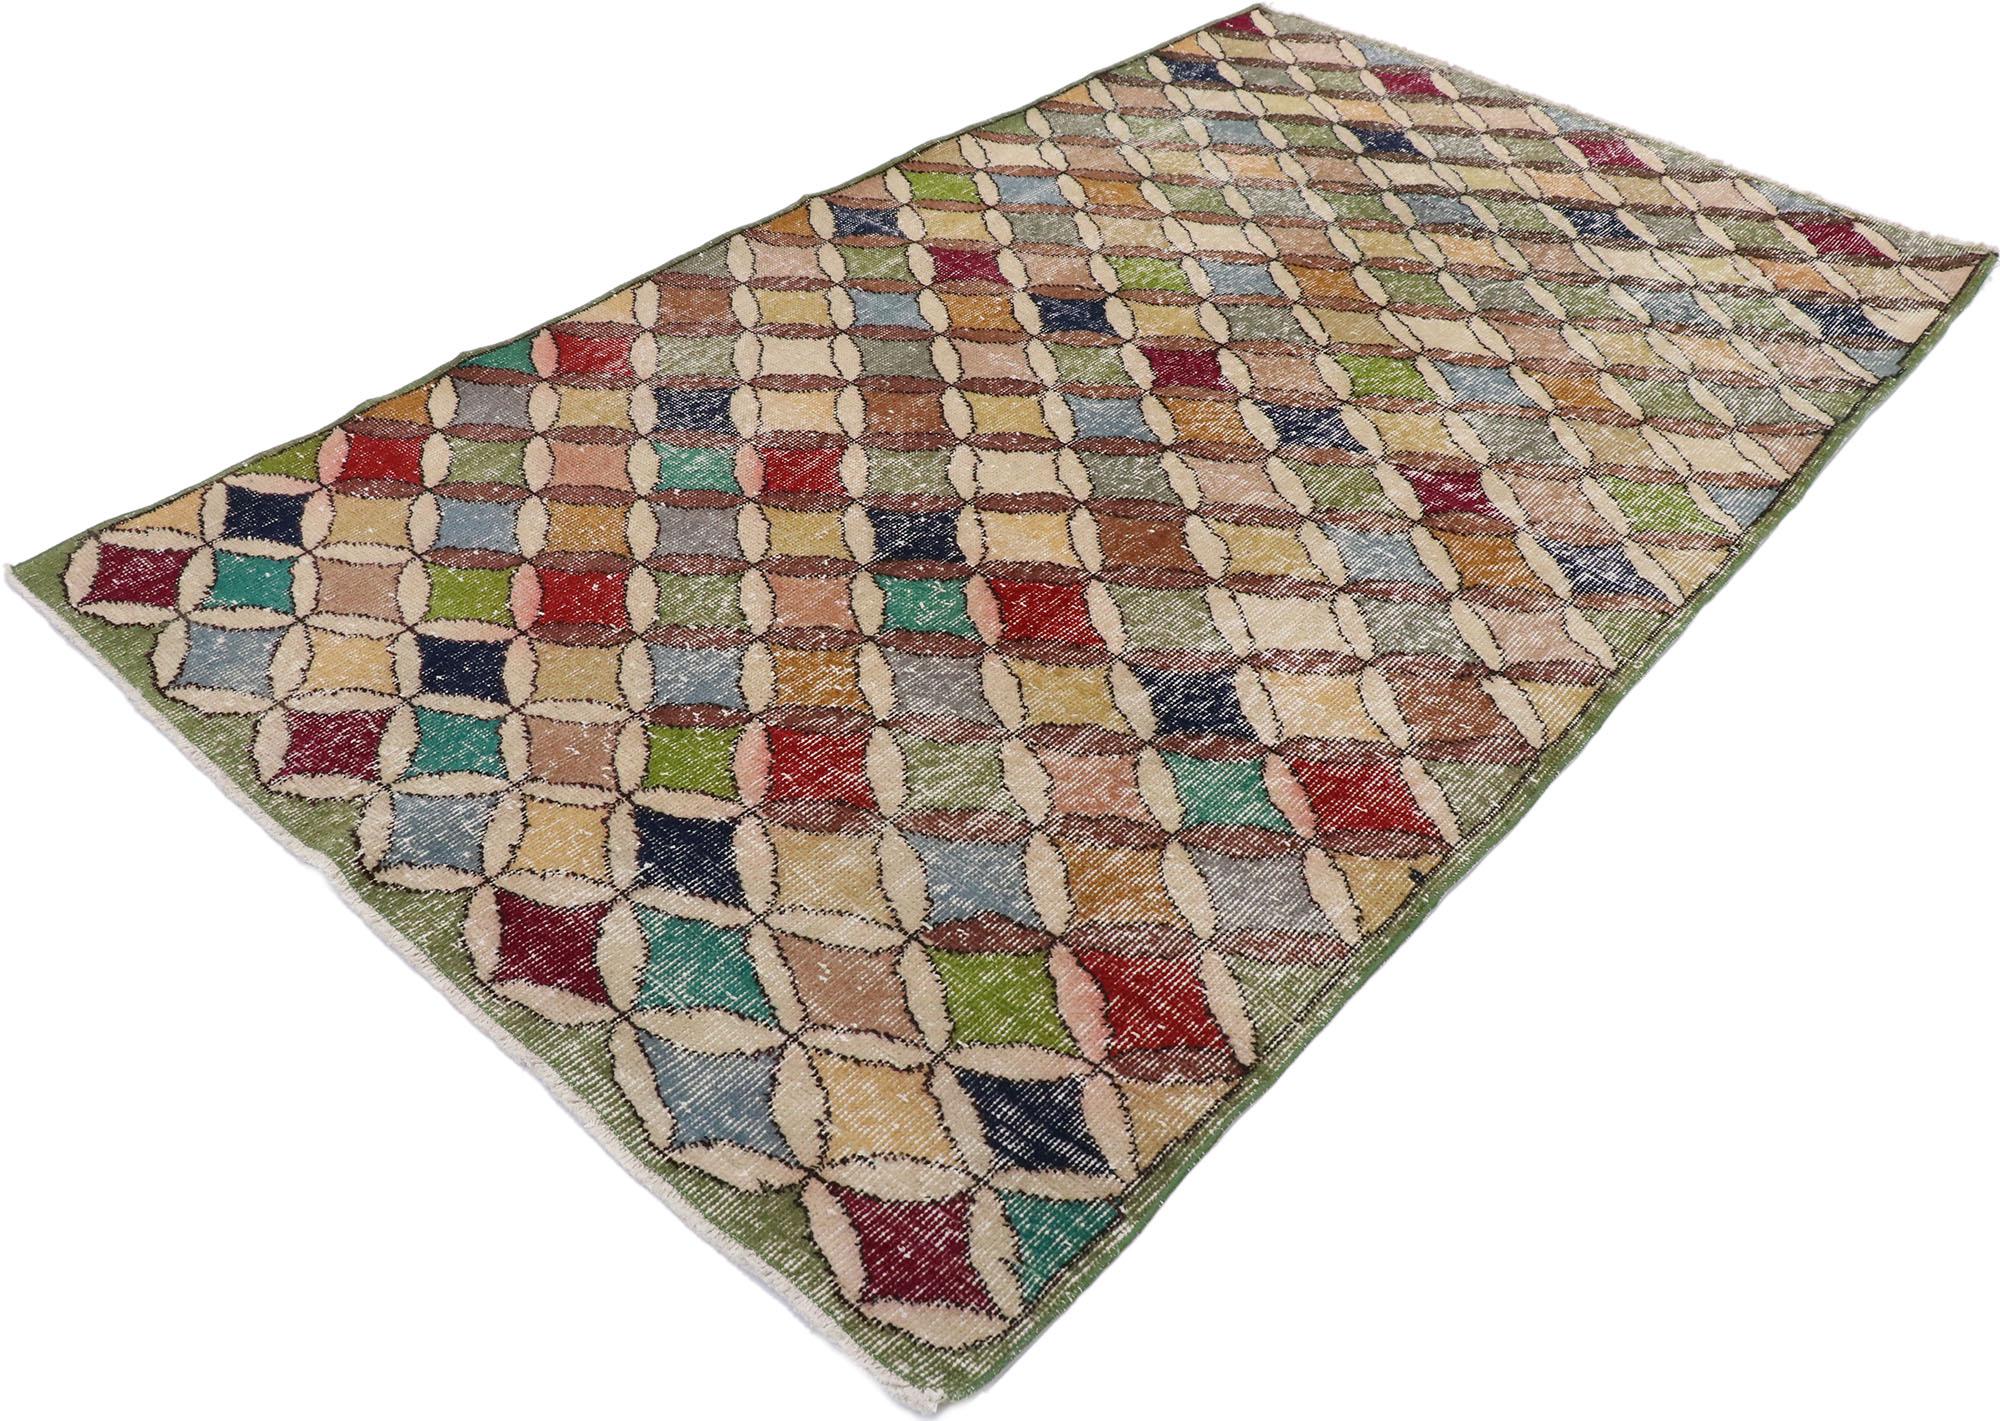 53325, distressed vintage Turkish Sivas rug with rustic Mediterranean style. This hand knotted wool distressed vintage Turkish Sivas rug features an all-over lattice pattern spread across an abrashed field. Cream and brown ovals form a trellis that